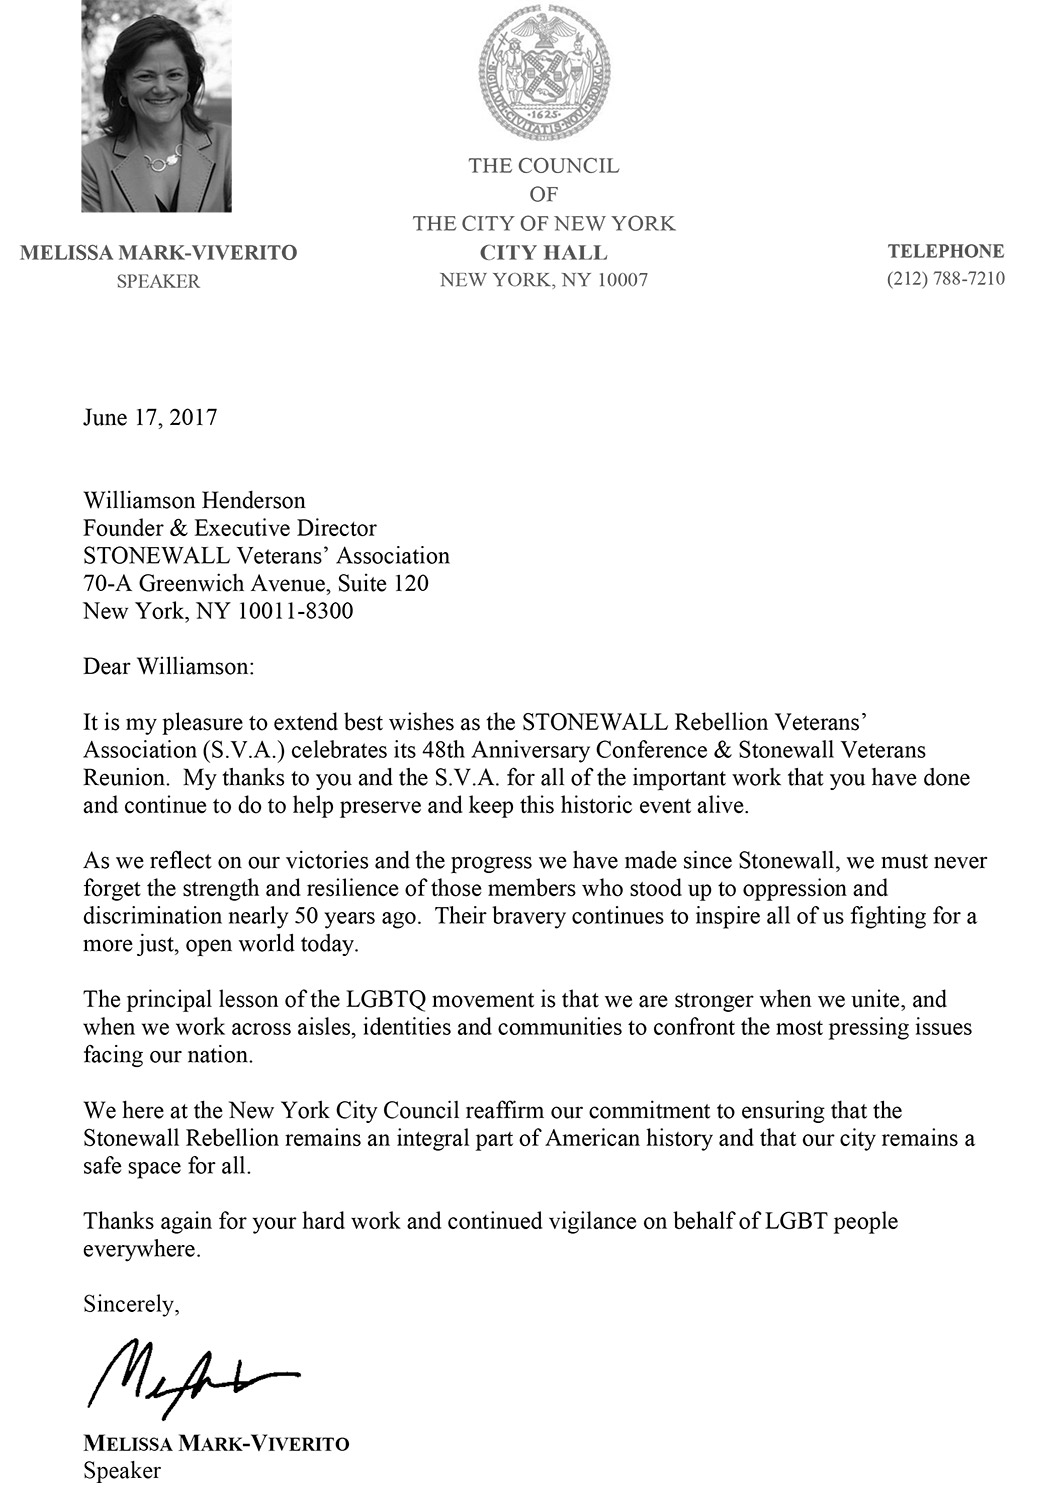 2017 - Council Speaker Melissa Viverito's Letter to the STONEWALL Vets